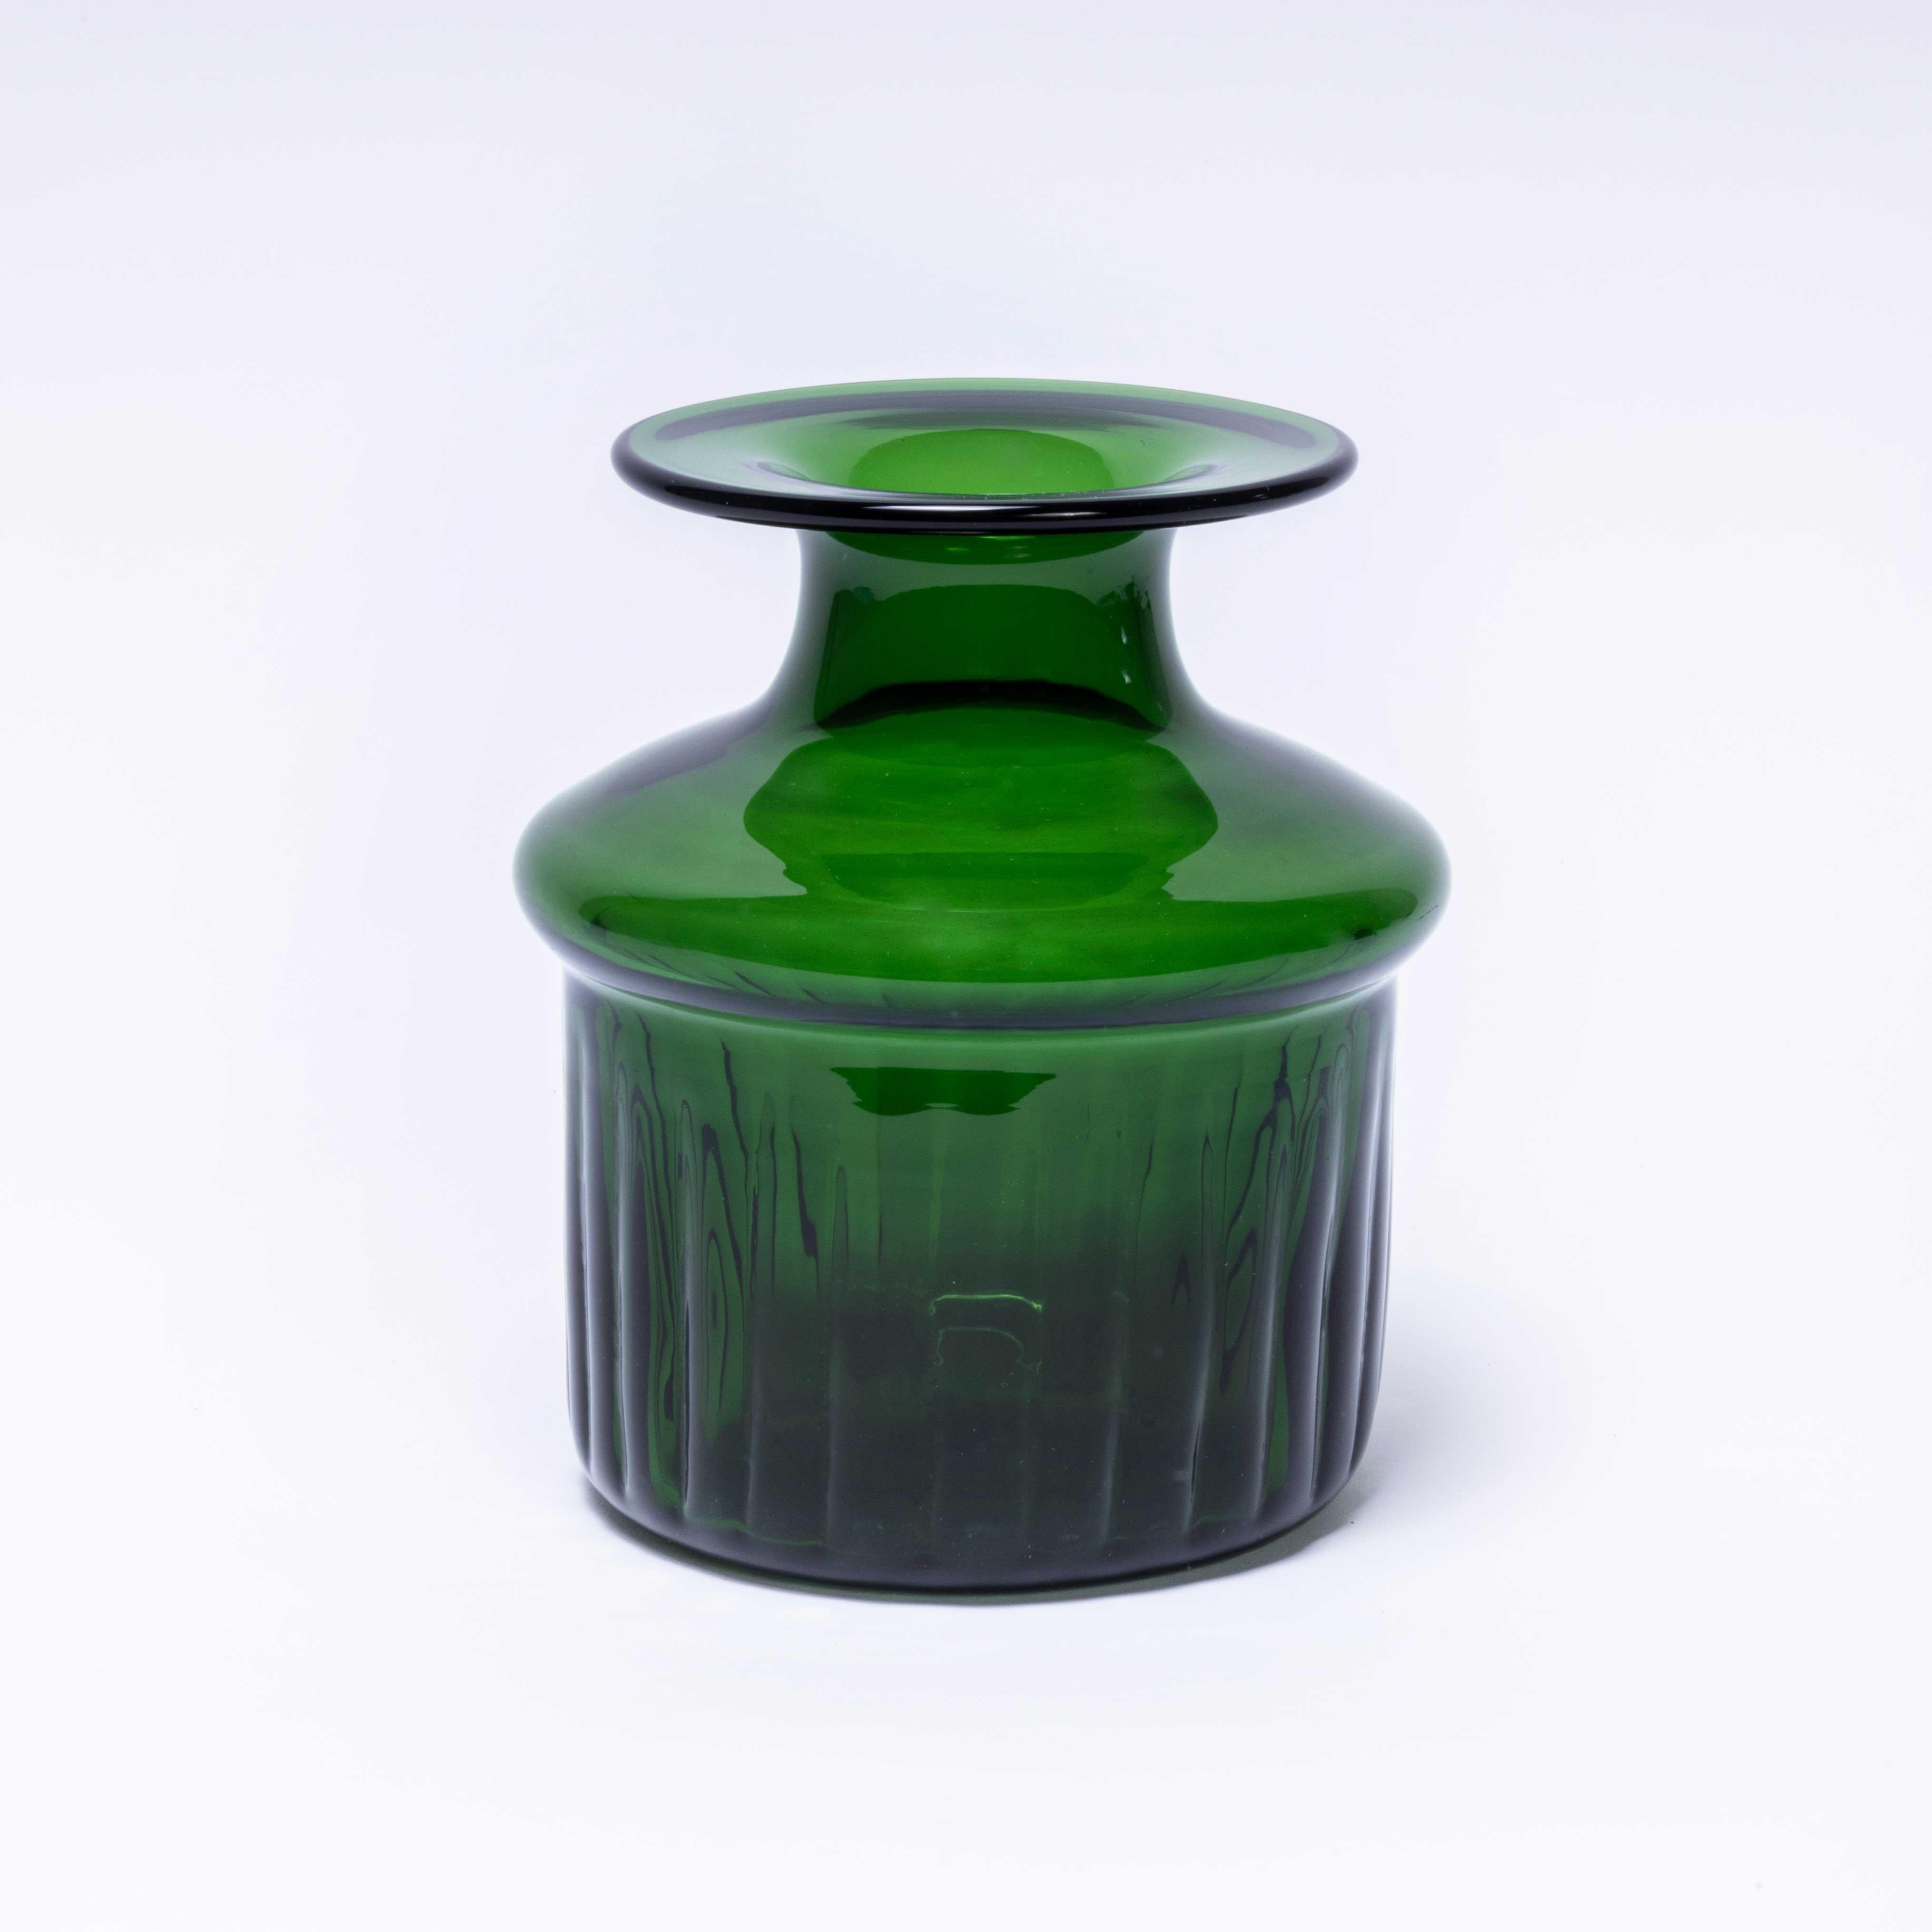 Mid century boda Afors Swedish green vase art glass
Mid century boda Afors Swedish green vase art glass. Stunning green vase made in Sweden for Boda Afors. Bertil Vallien is one of Sweden?s most acclaimed glass artist of the 2nd half of the 20th